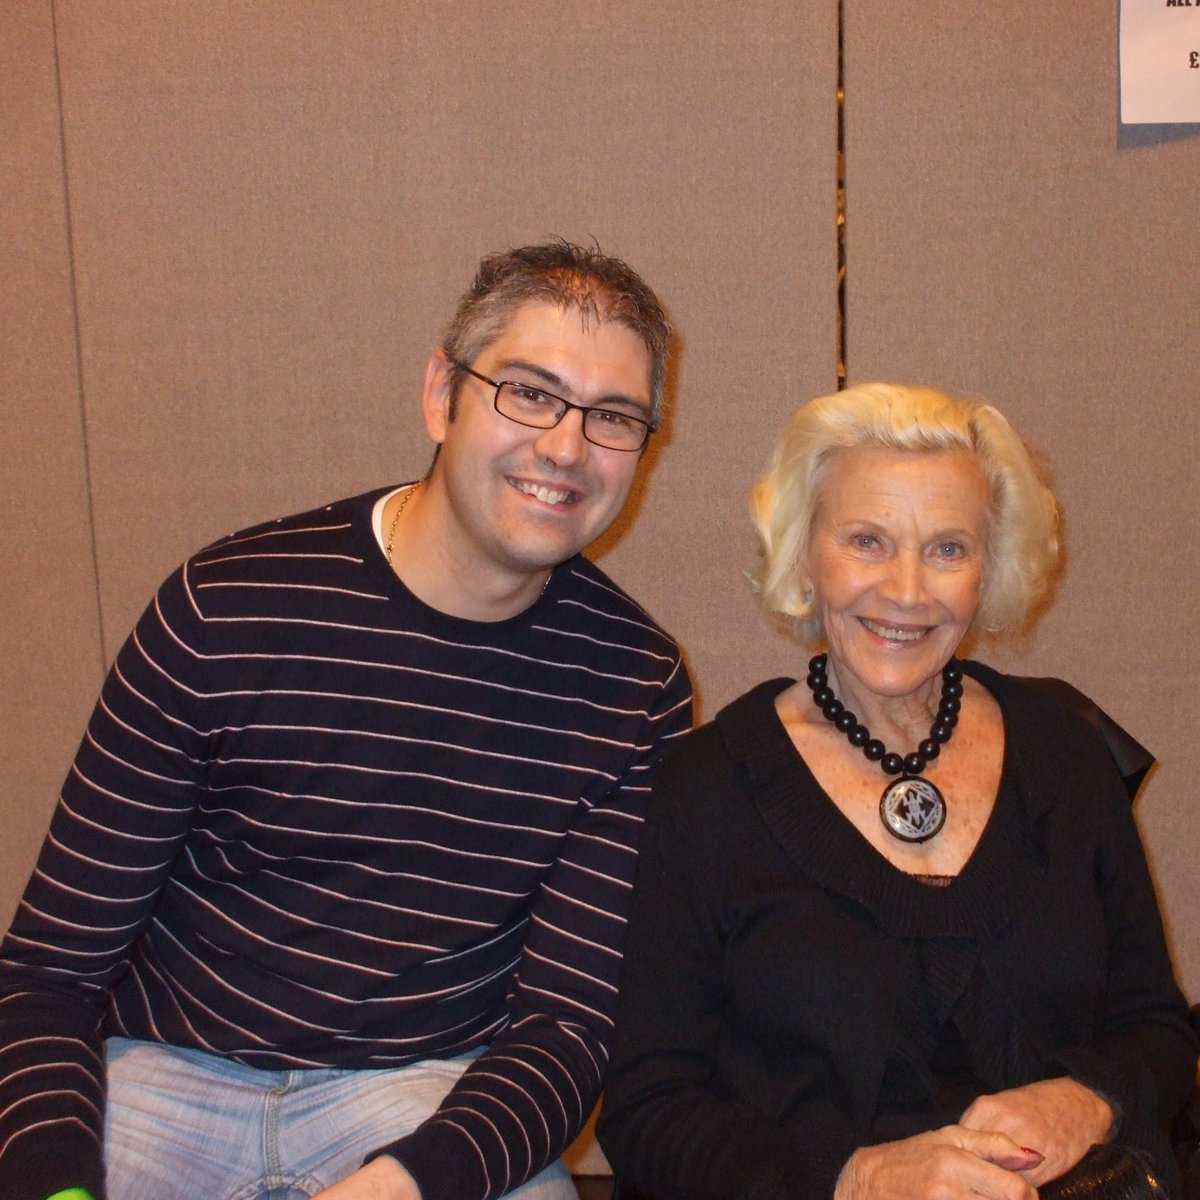 Today's Camping It Up star is Honor Blackman. This previously unseen shot comes from Memorabilia in 2009 and Honor was truly wonderful. I met her again a couple of years later at the big celebration of The Avengers 50th anniversary and she was just as brilliant there.